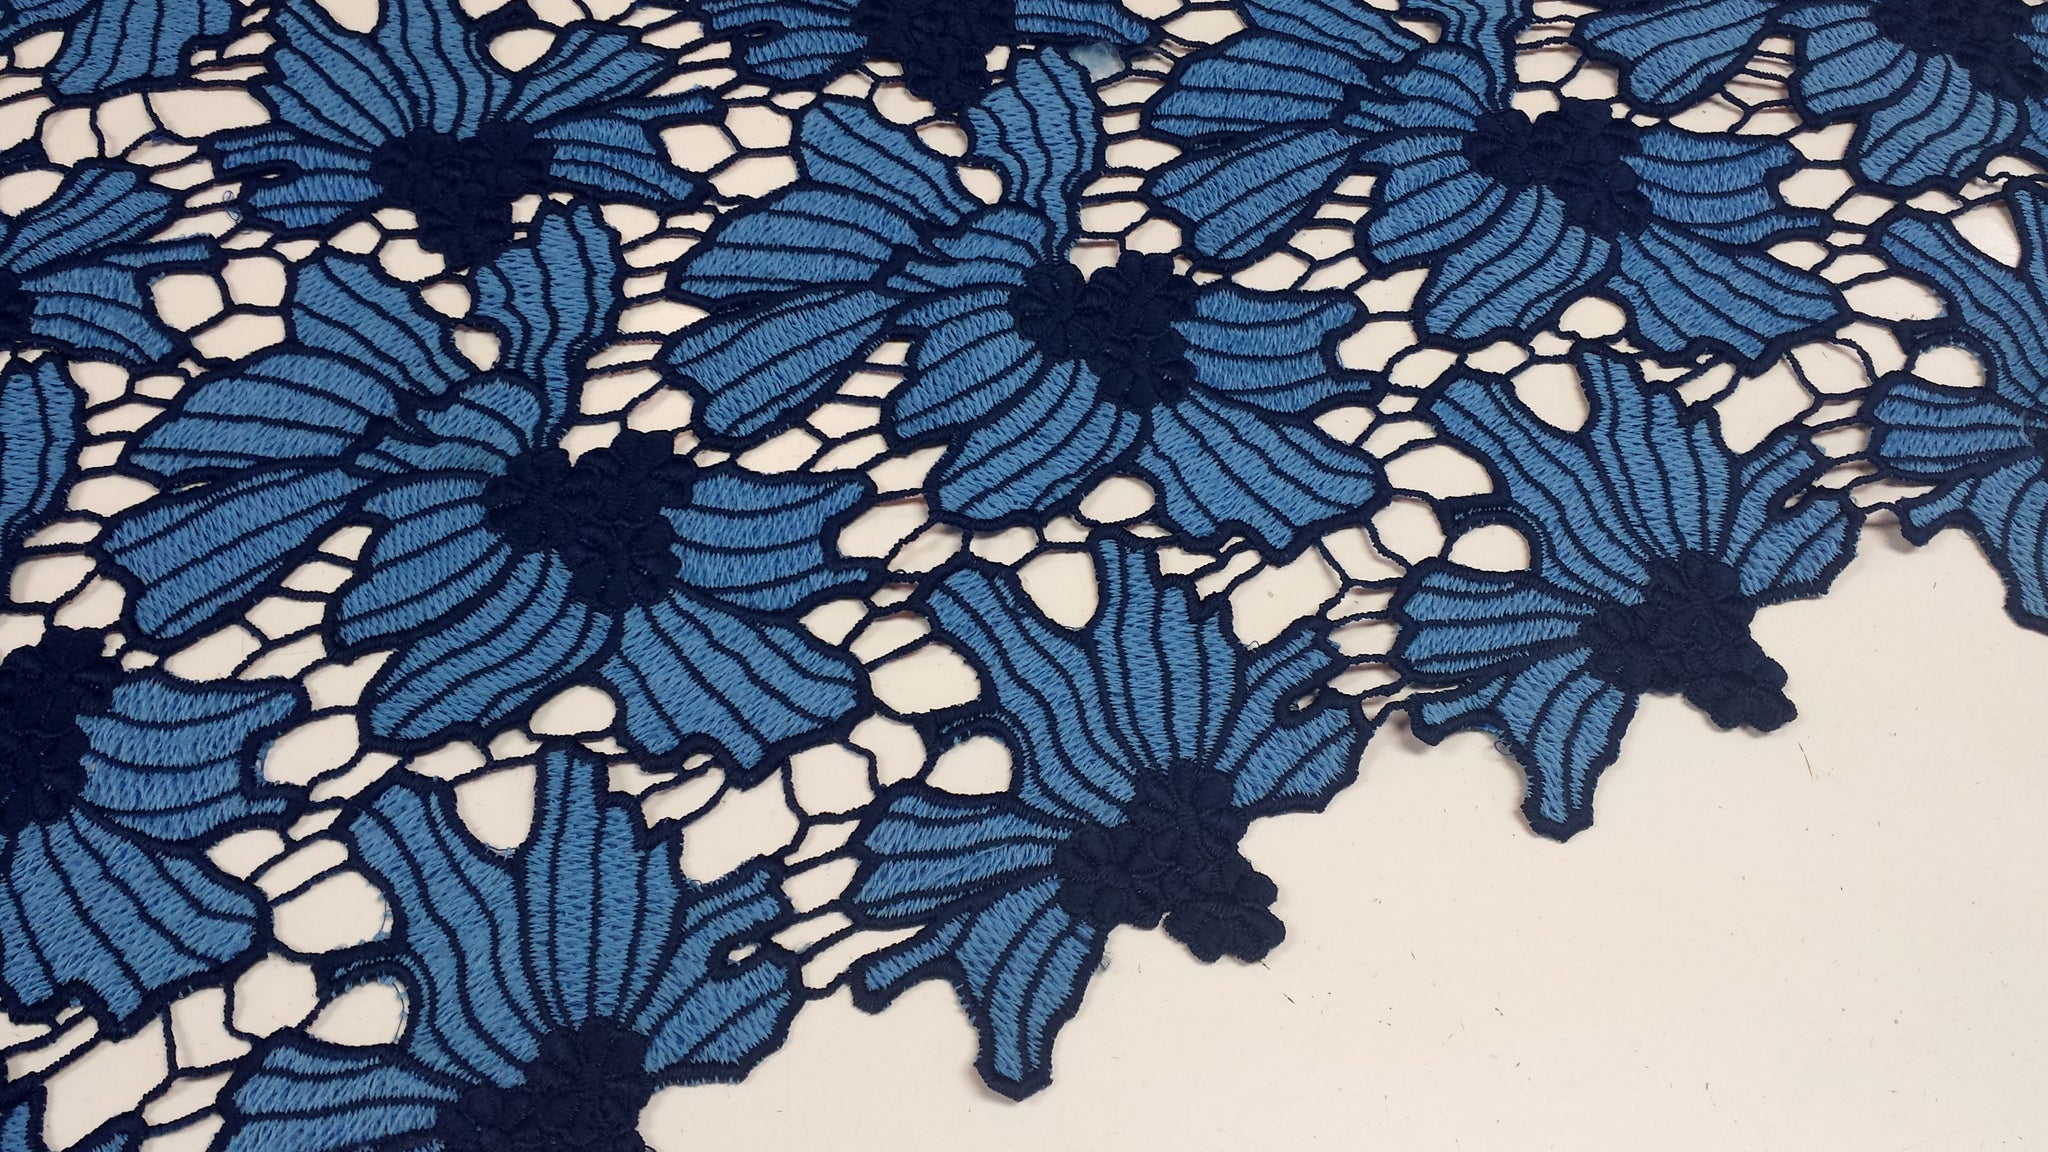 Dark blue lace fabric - Guipure lace - lace fabric from